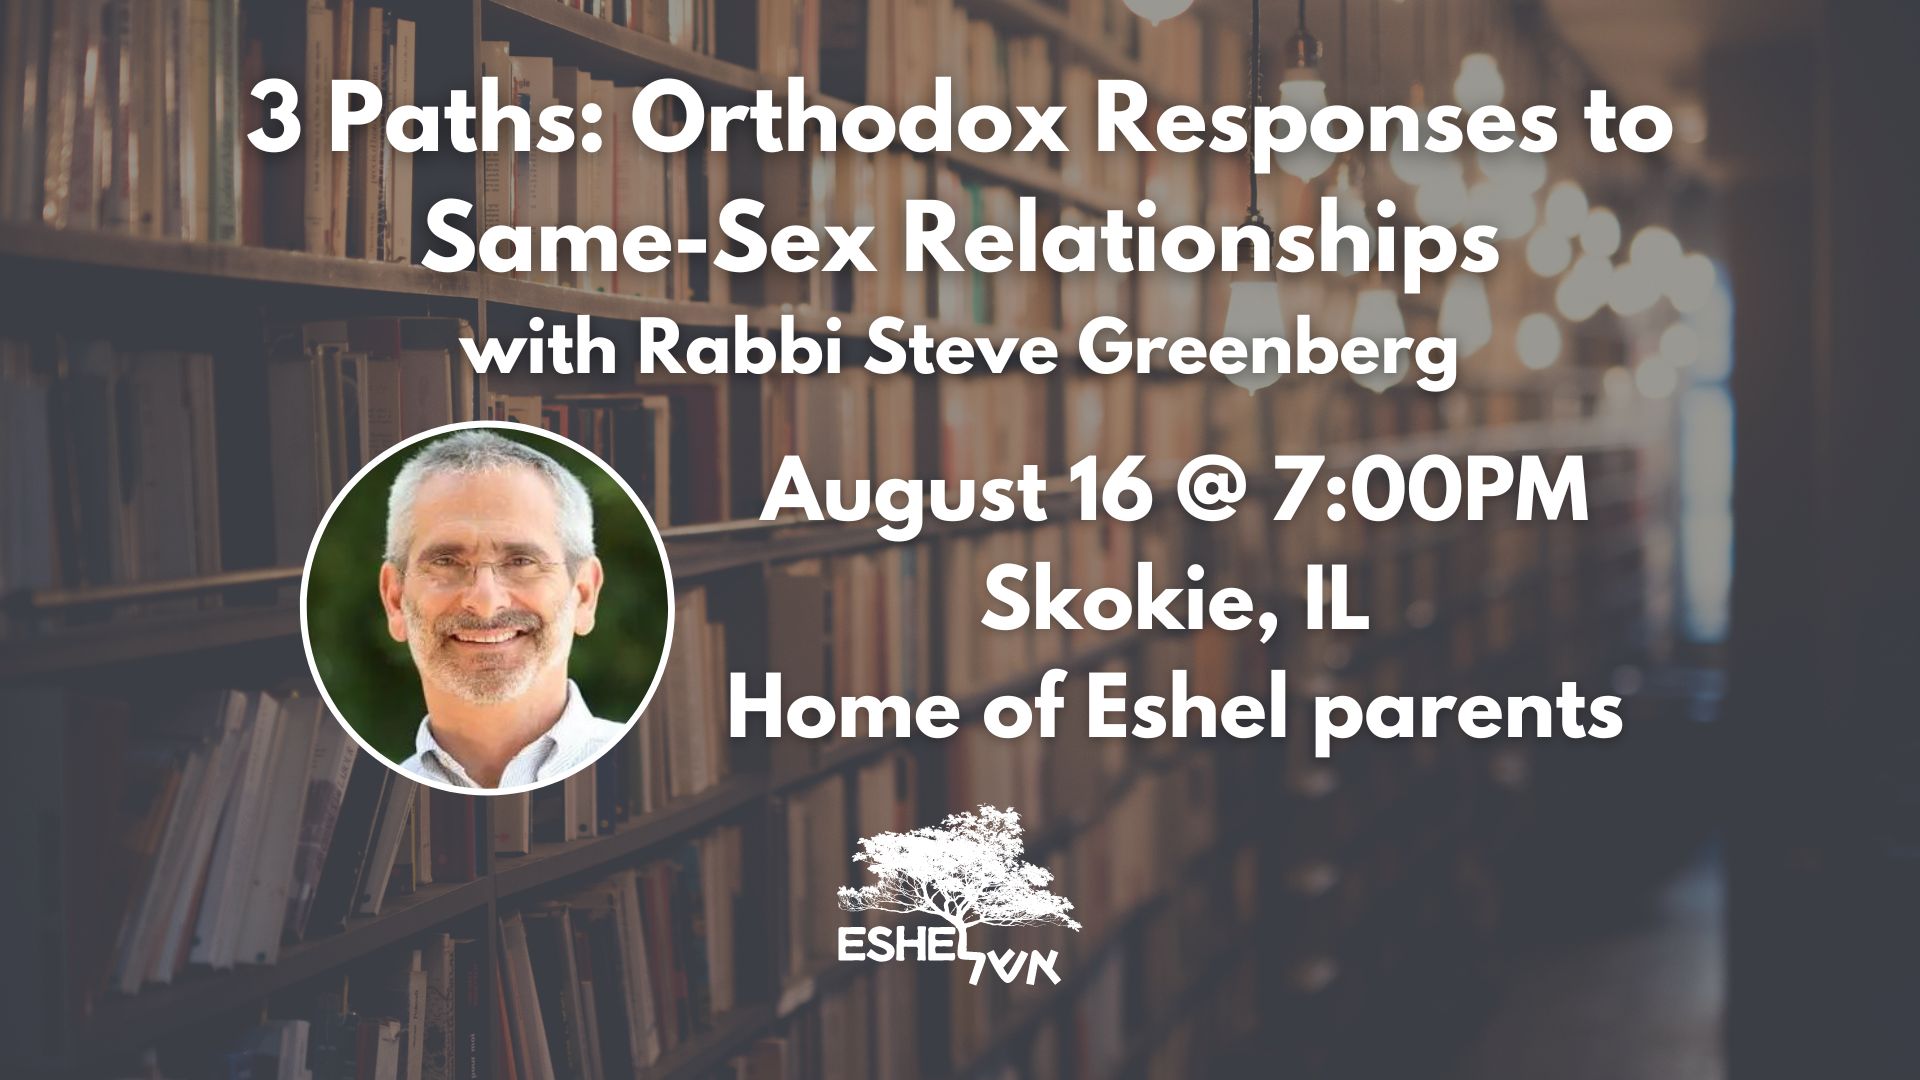 3 Paths: Orthodox Responses to Same-Sex Relationships with Rabbi Steve Greenberg | August 16 @ 7:00 pm, Skokie, IL, Home of Eshel Parents